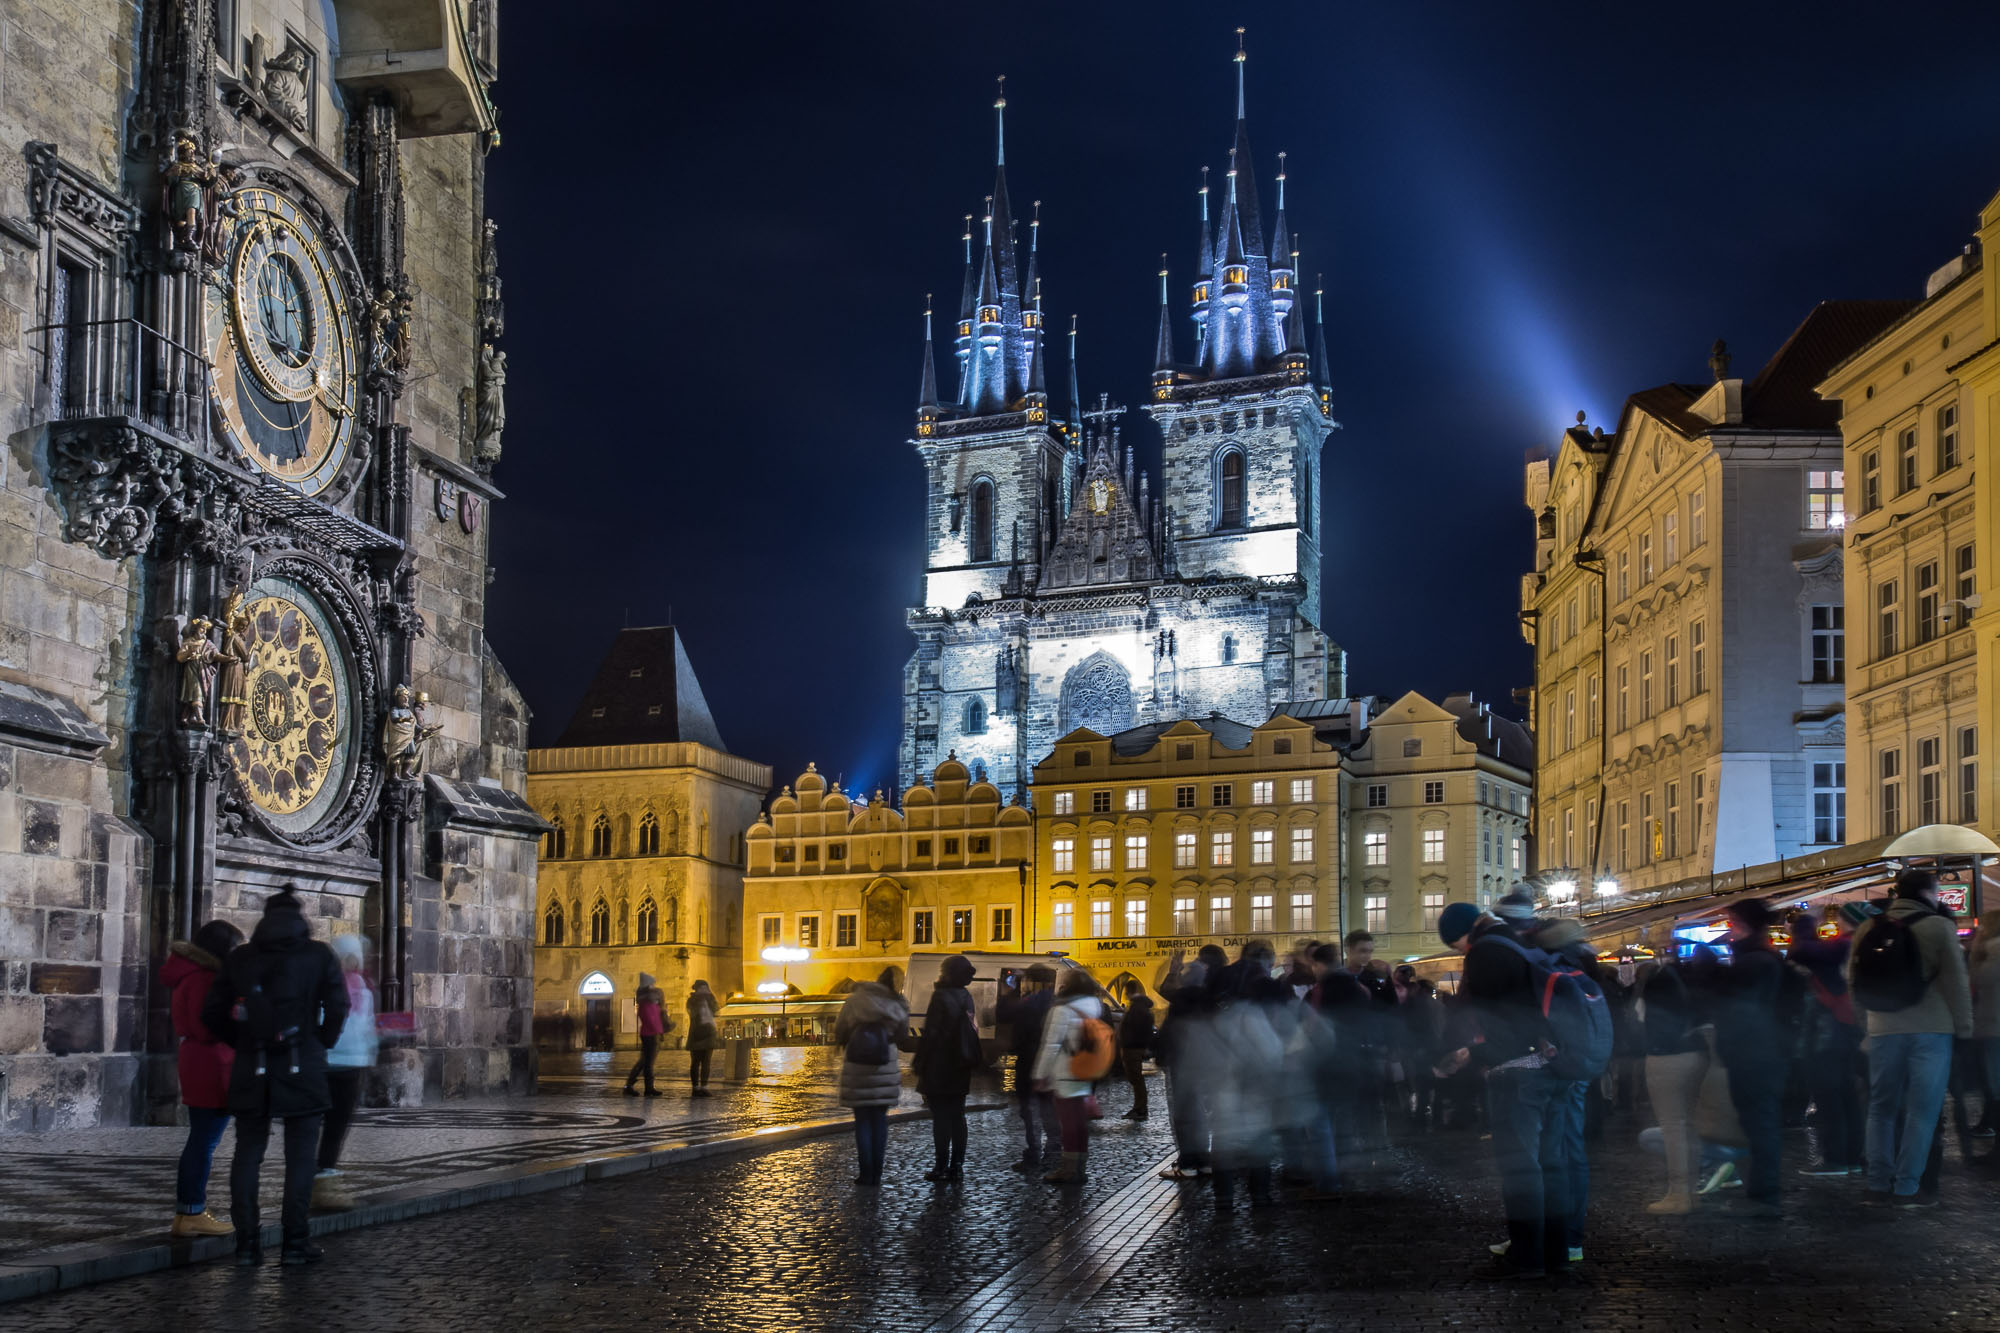 Old Town Square in Prague